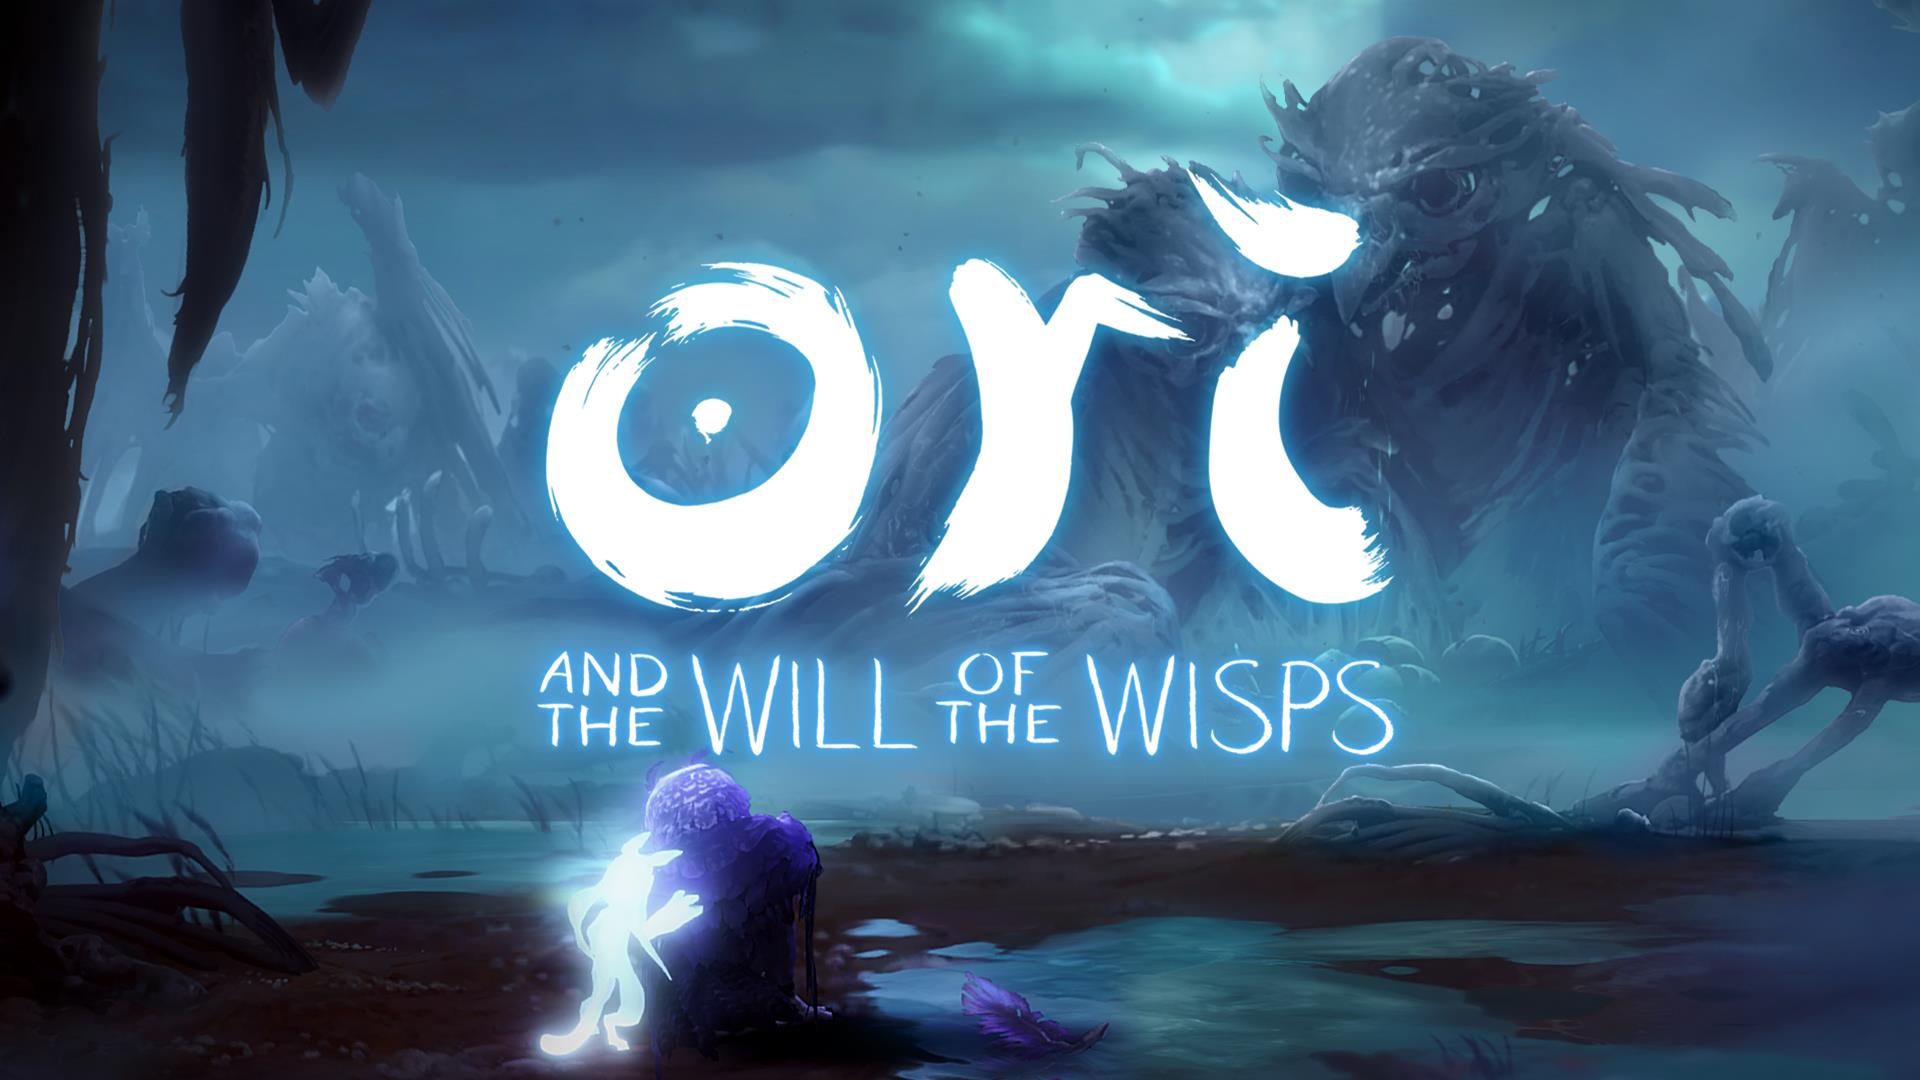 Video Game Ori And The Will Of The Wisps 1920x1080